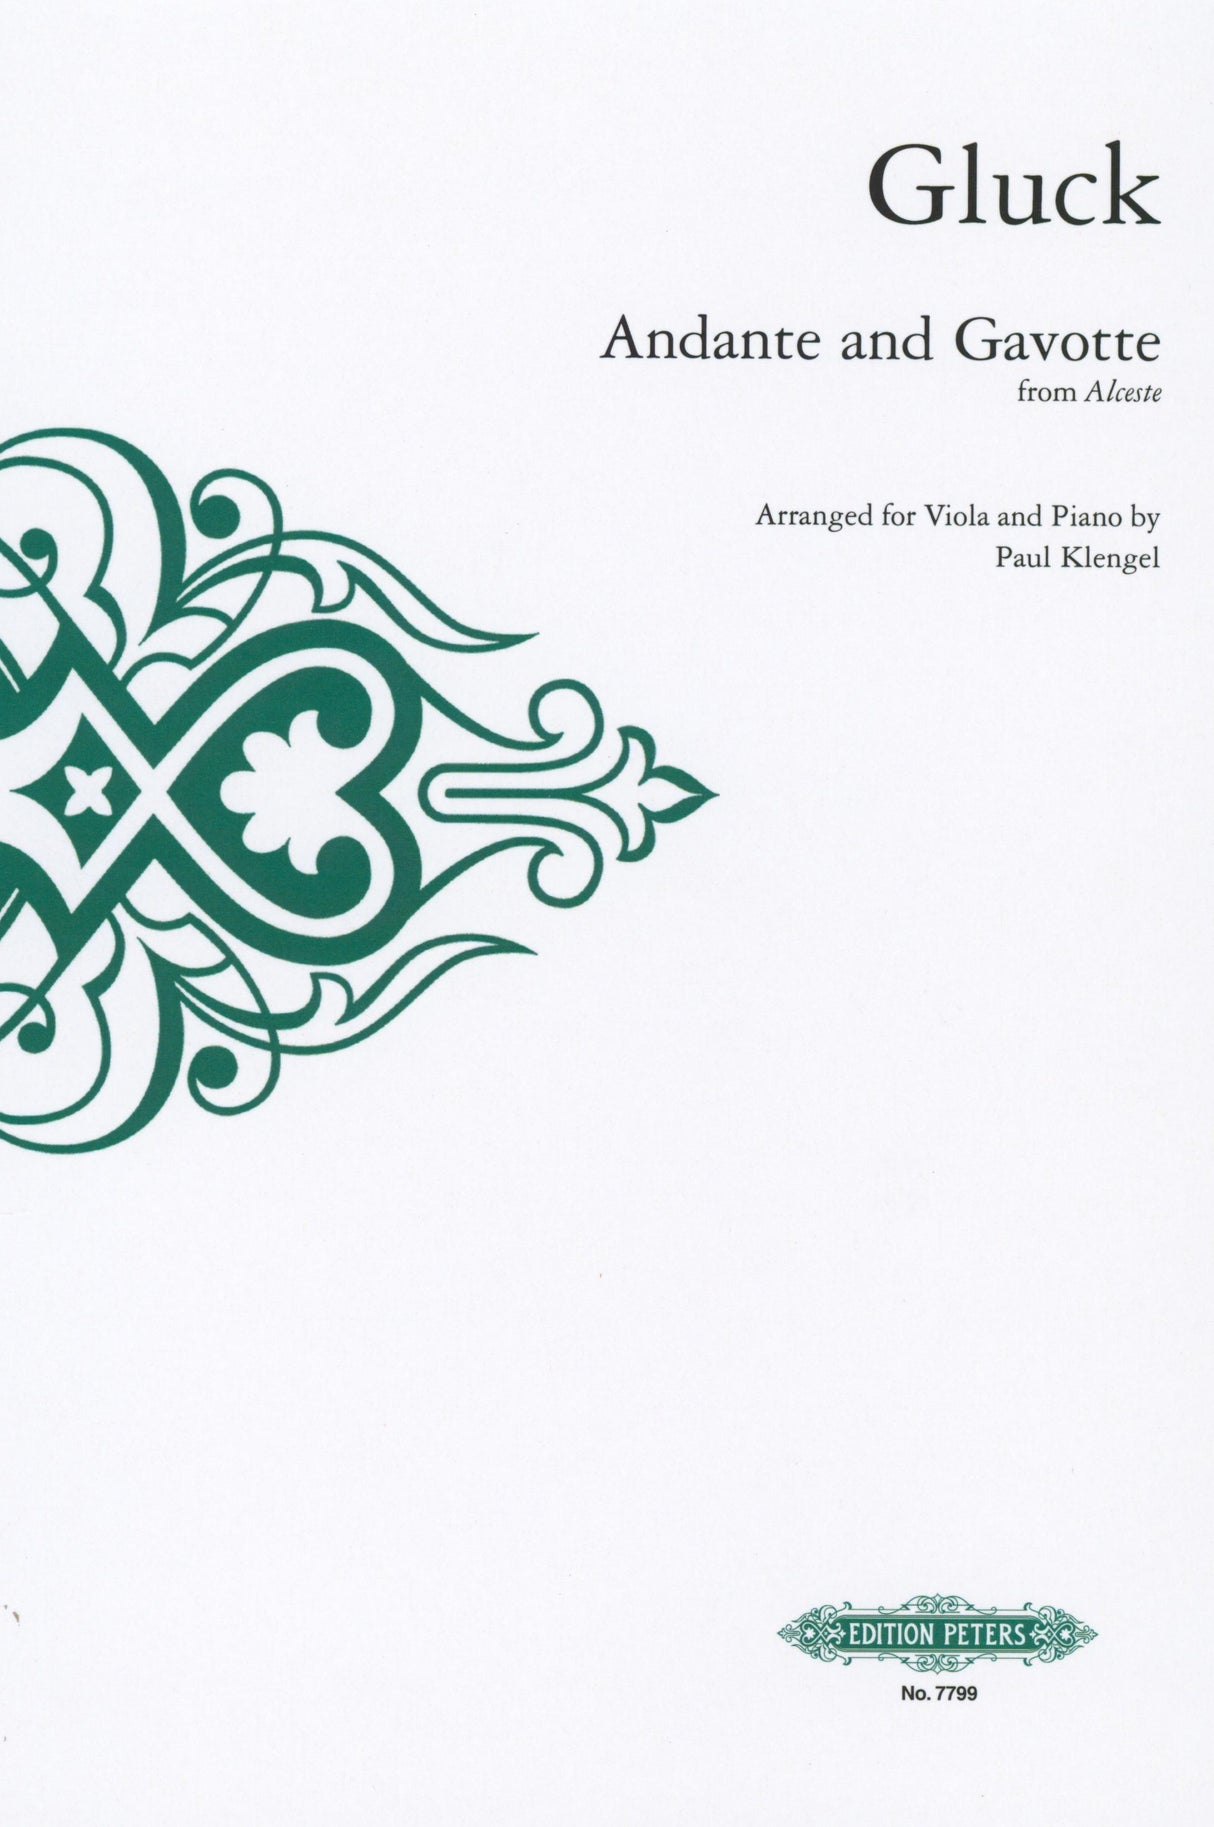 Gluck: Andante and Gavotte from Alceste (arr. for viola and piano)